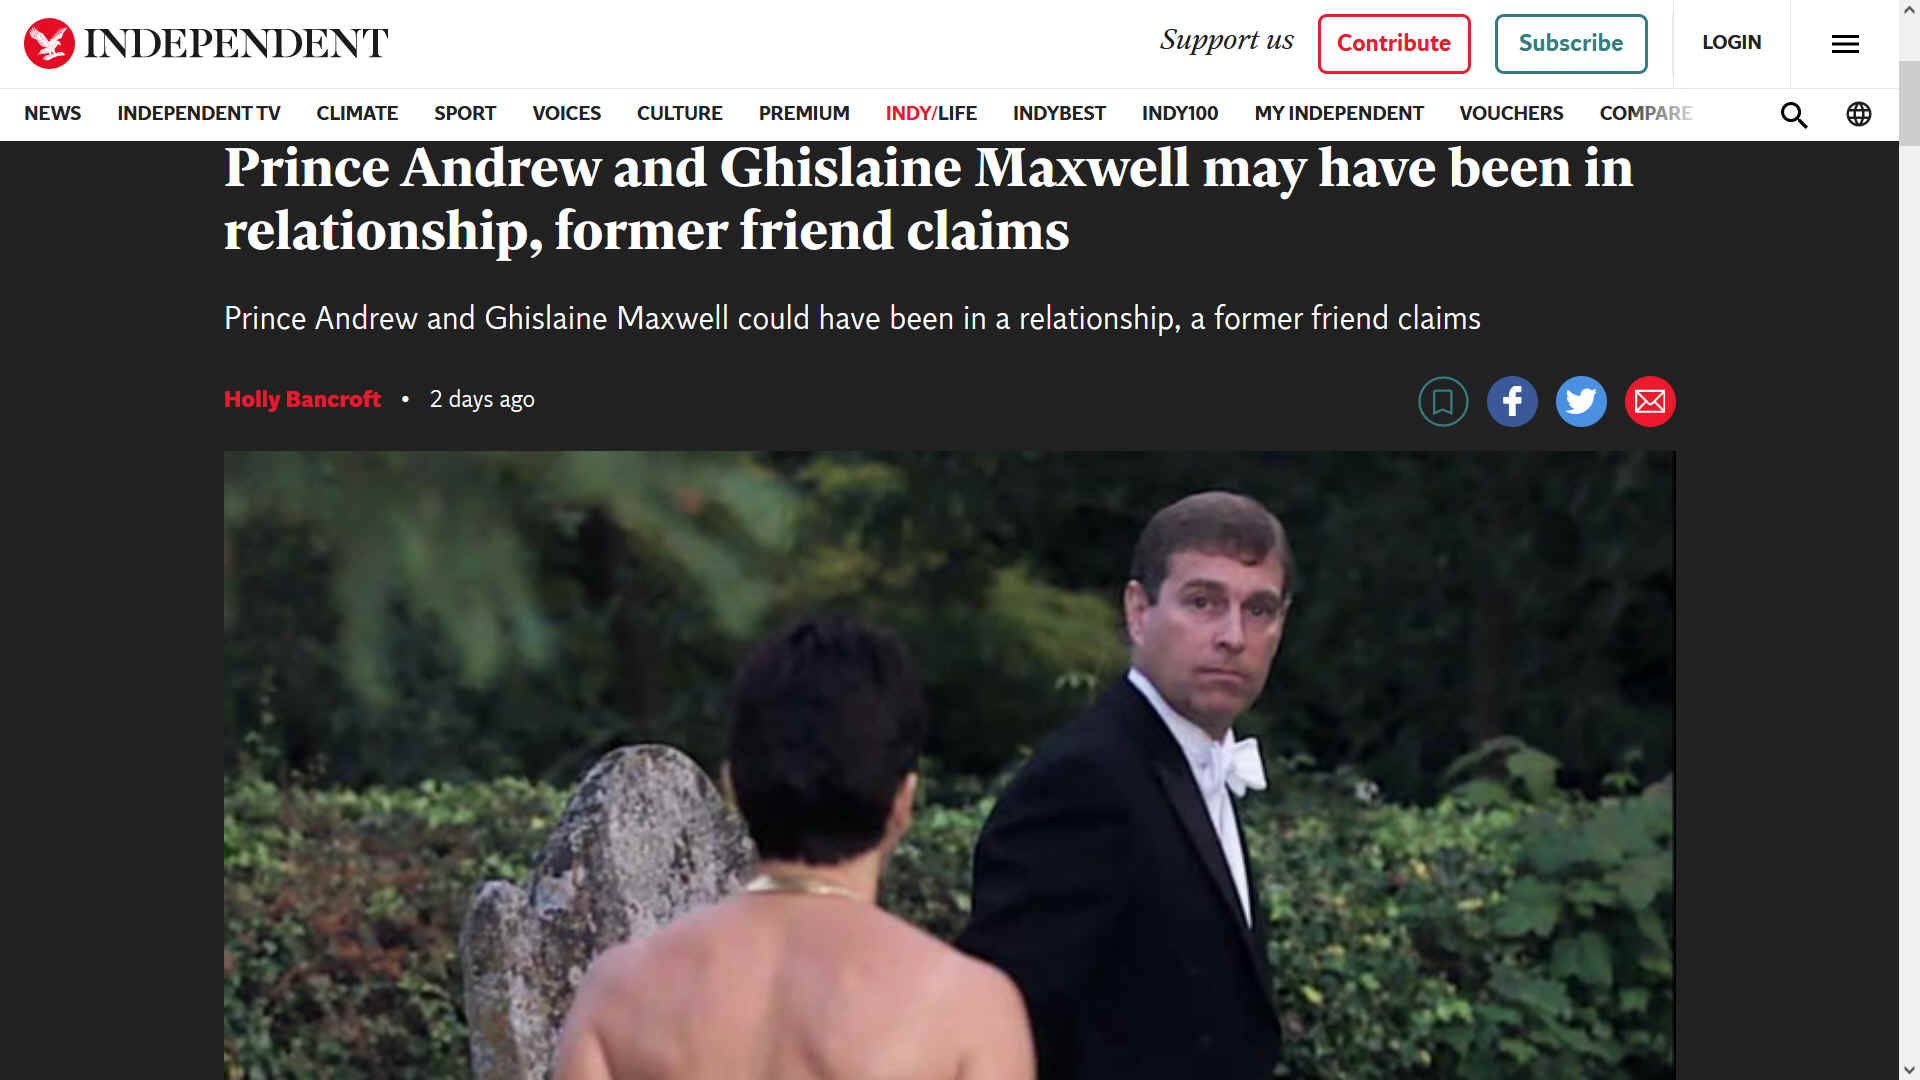 Prince Andrew Duke of York and Ghislaine Maxwell may have been an item at one point